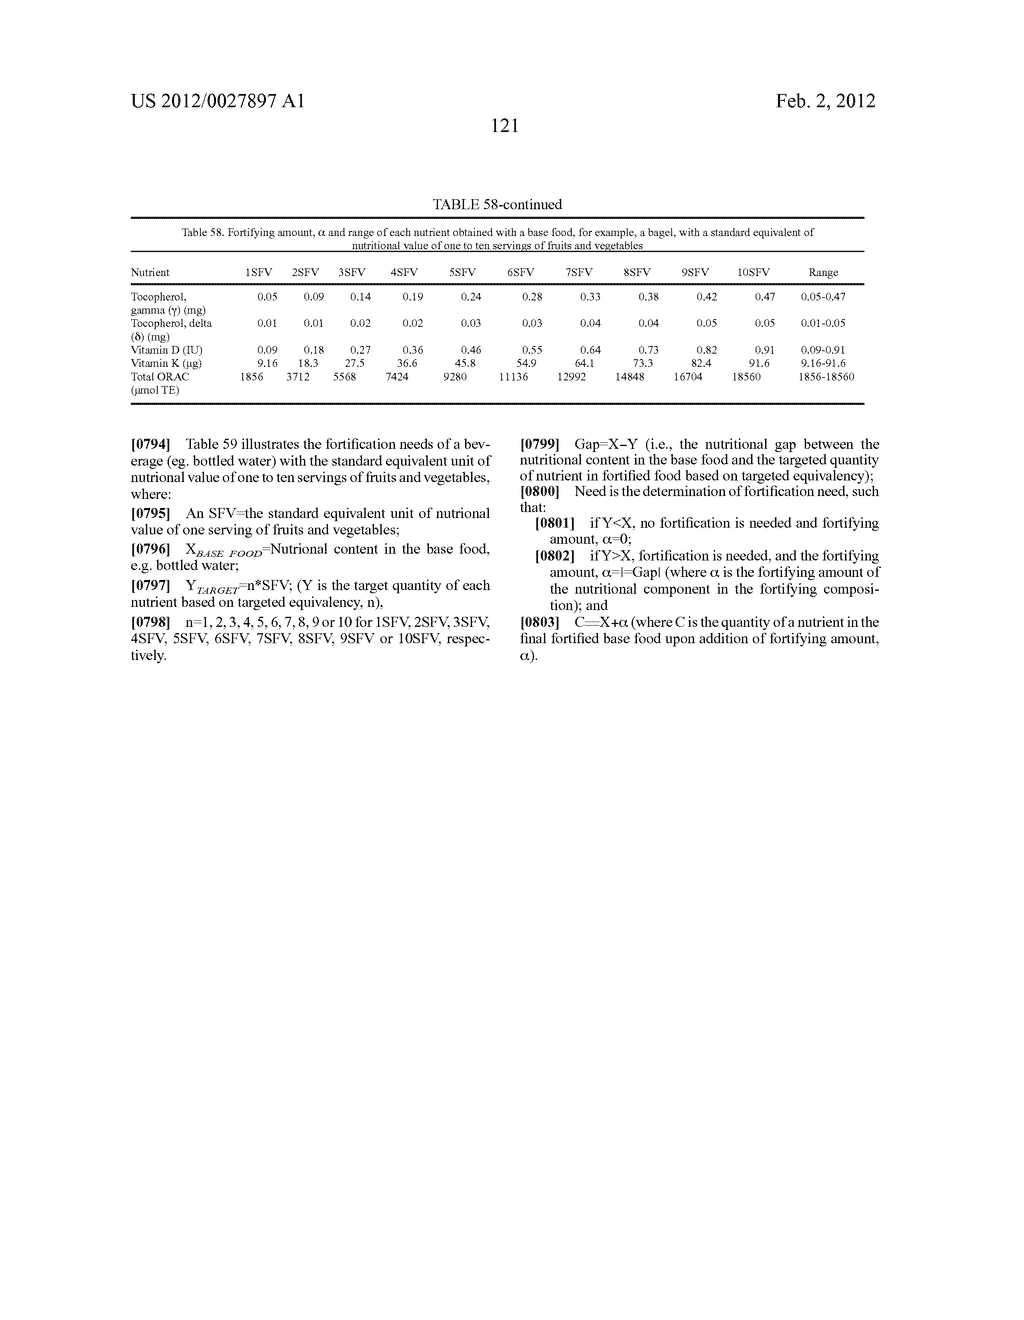 Methods For Quantifying The Complete Nutritional Value Of A Standard     Equivalent Unit Of The Nutritional Value Of One Serving Of Fruits &     Vegetables (SFV)And For Fortifying A Base Food To Contain Same For Human     Consumption - diagram, schematic, and image 122